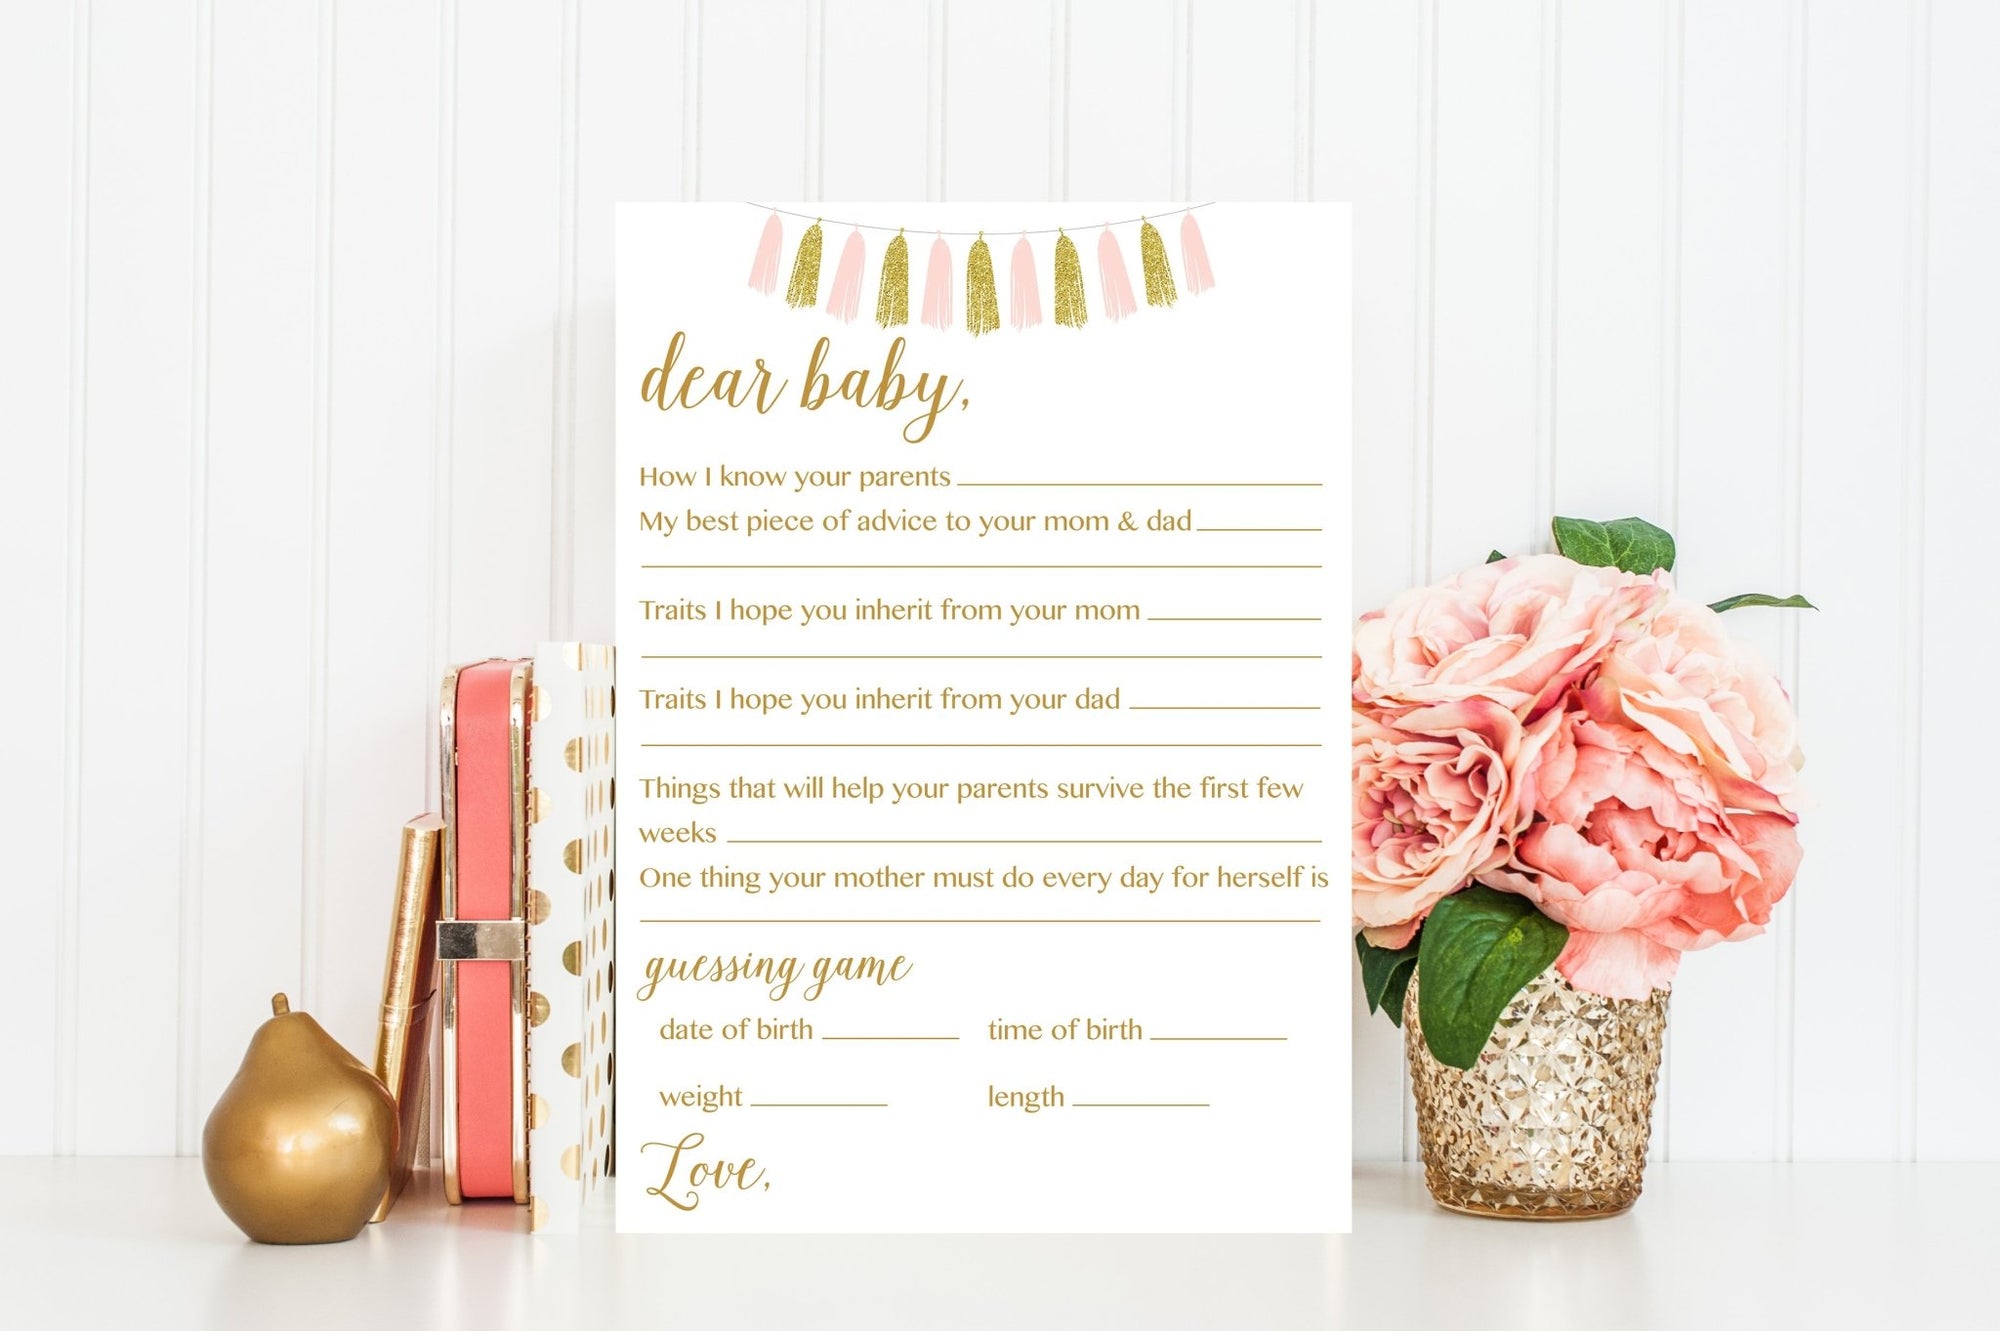 Dear Baby & Guessing Game - Pink & Gold Tassel Printable - Pretty Collected